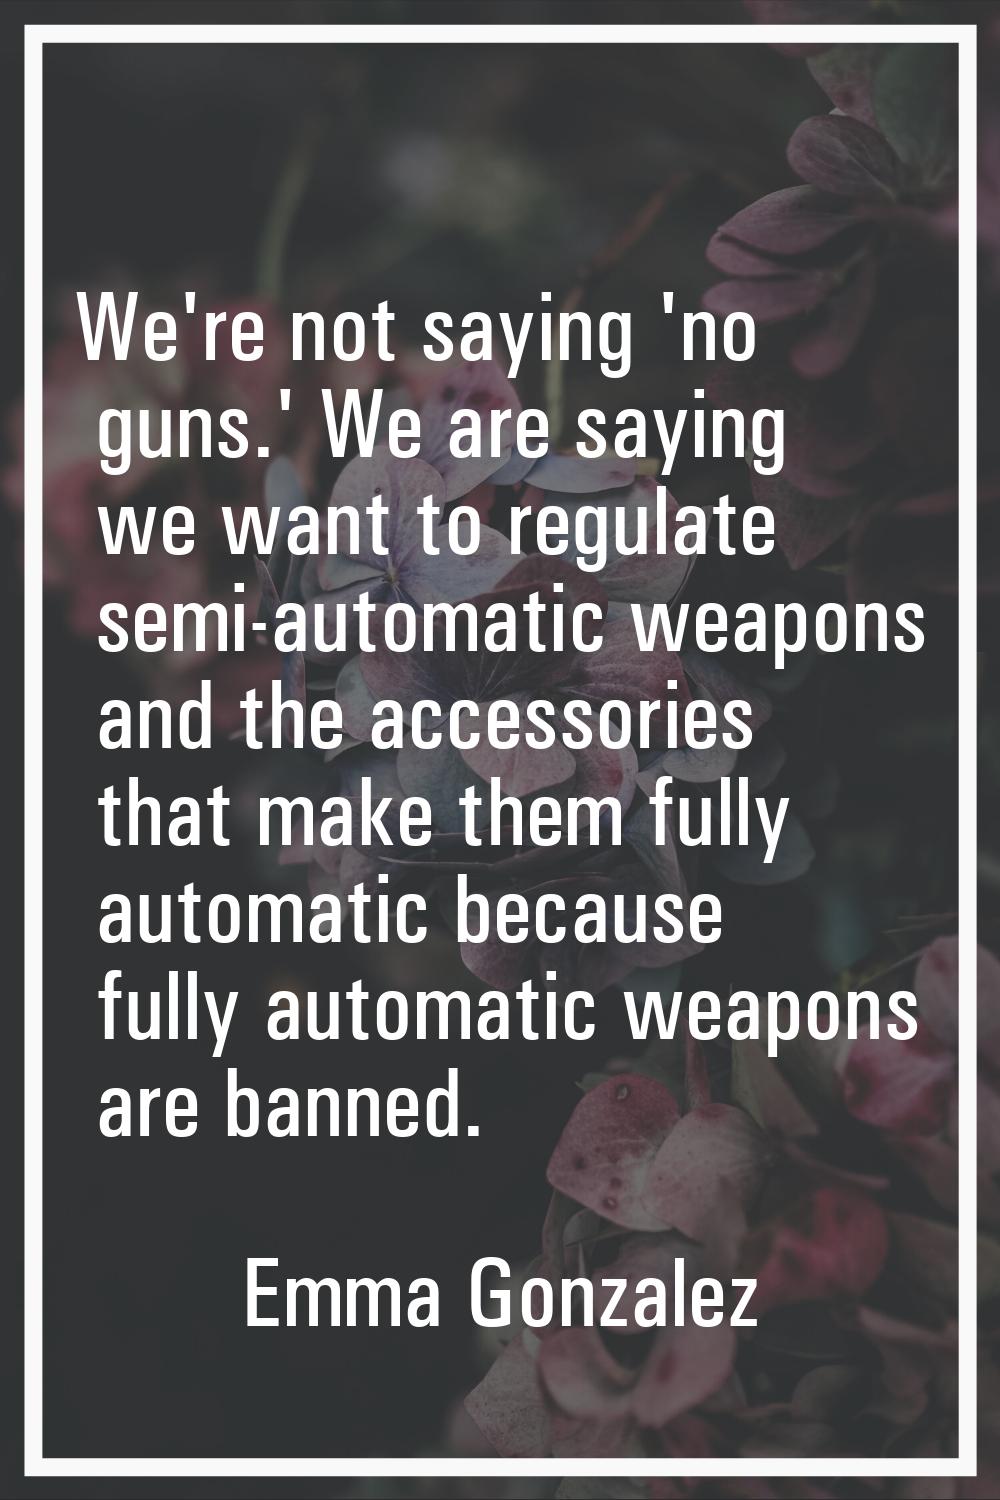 We're not saying 'no guns.' We are saying we want to regulate semi-automatic weapons and the access